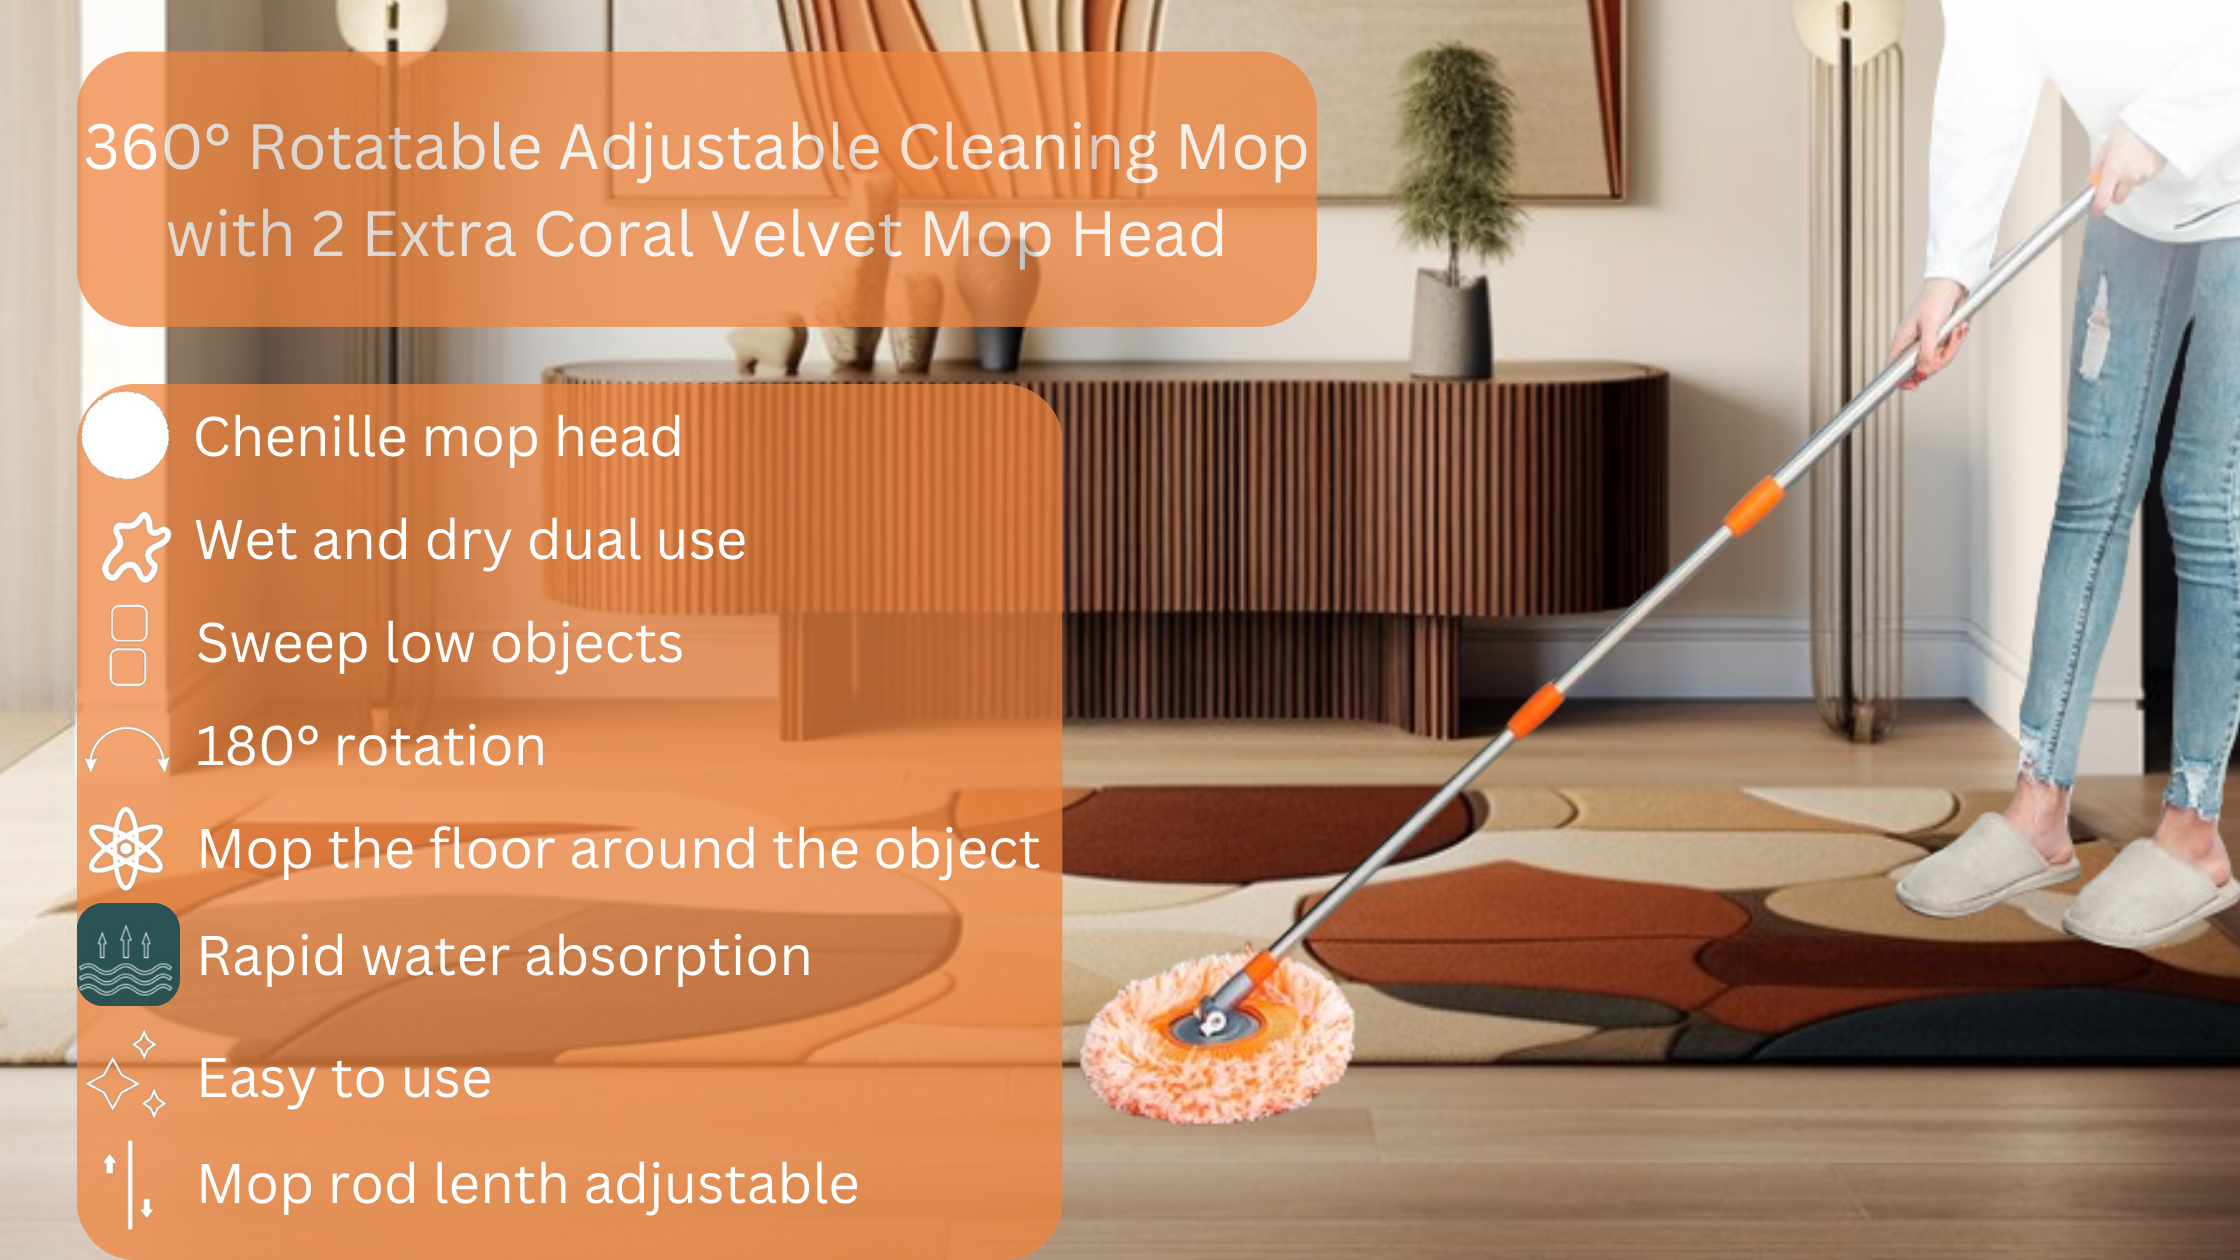 360° Rotatable Adjustable Cleaning Mop with 2 Extra Coral Velvet Mop Head, Long Handle Telescoping Microfiber Dust Mop,Wet & Dry Cleaning Mop for Hardwood,Wall,car (Three-Section Rod(67inch))